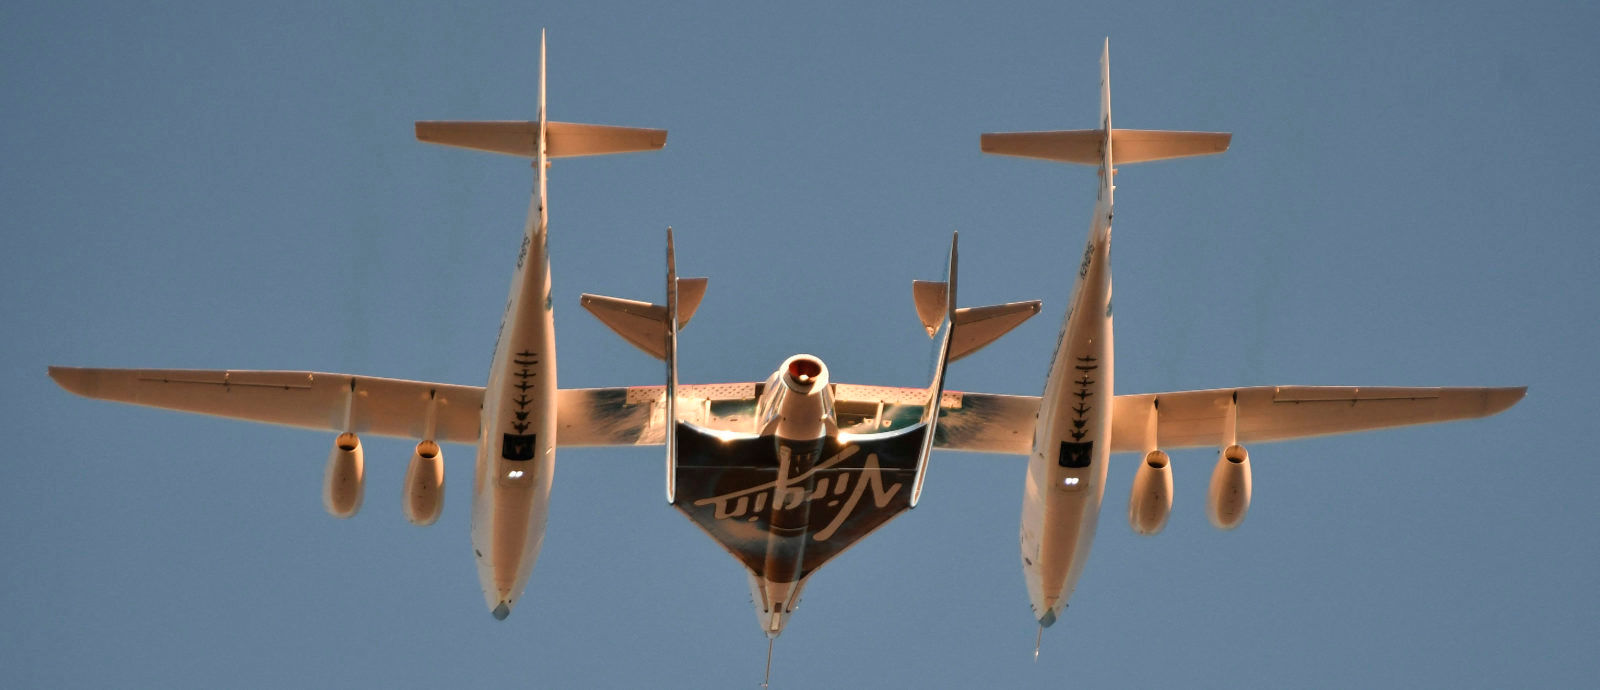 How much does a ticket on Virgin Galactic really cost?